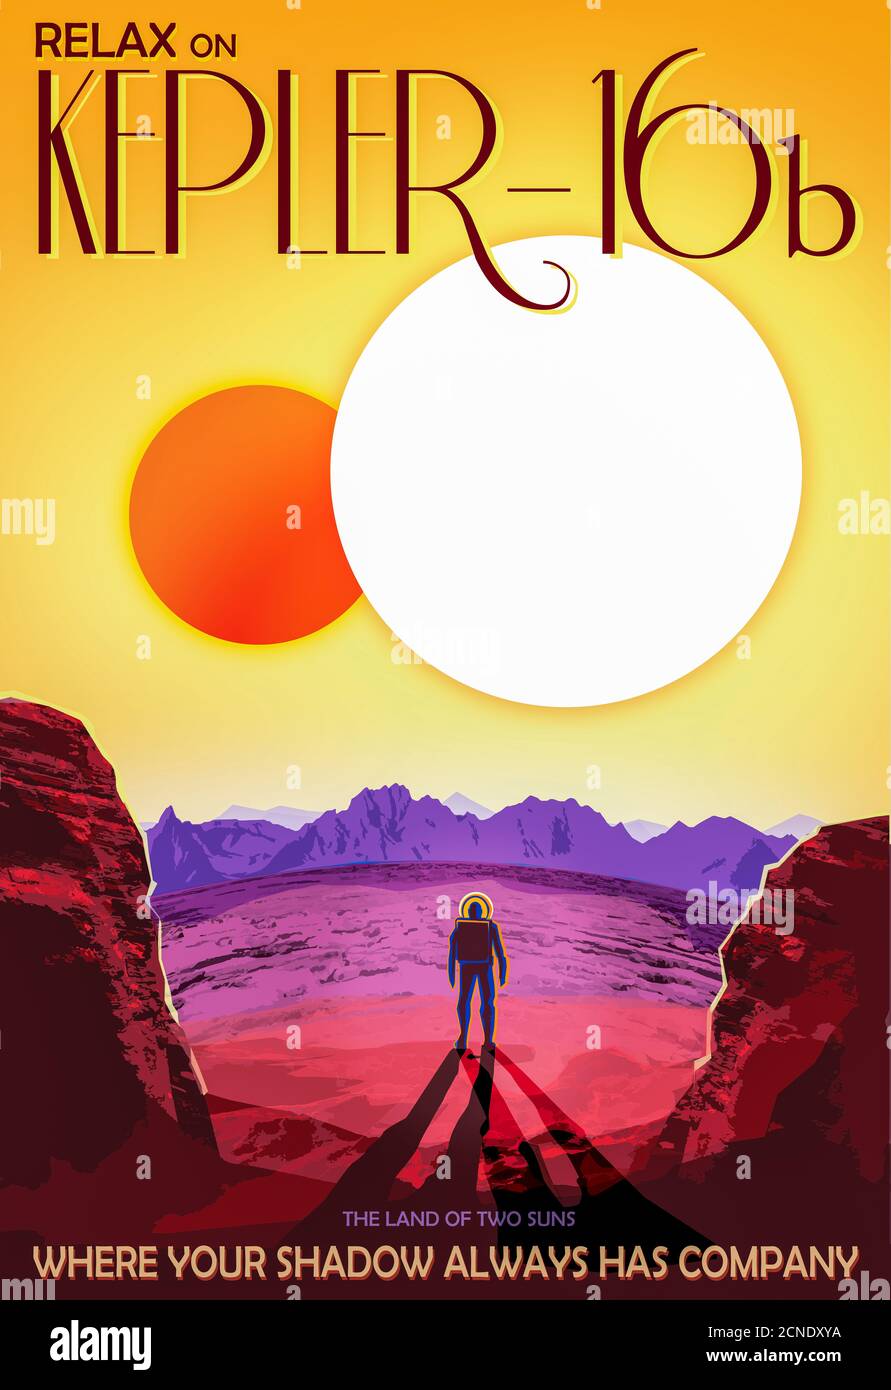 Kepler-16b: Visions of the Future space travel posters created by NASA,s Jet Propulsion Laboratory. Stock Photo